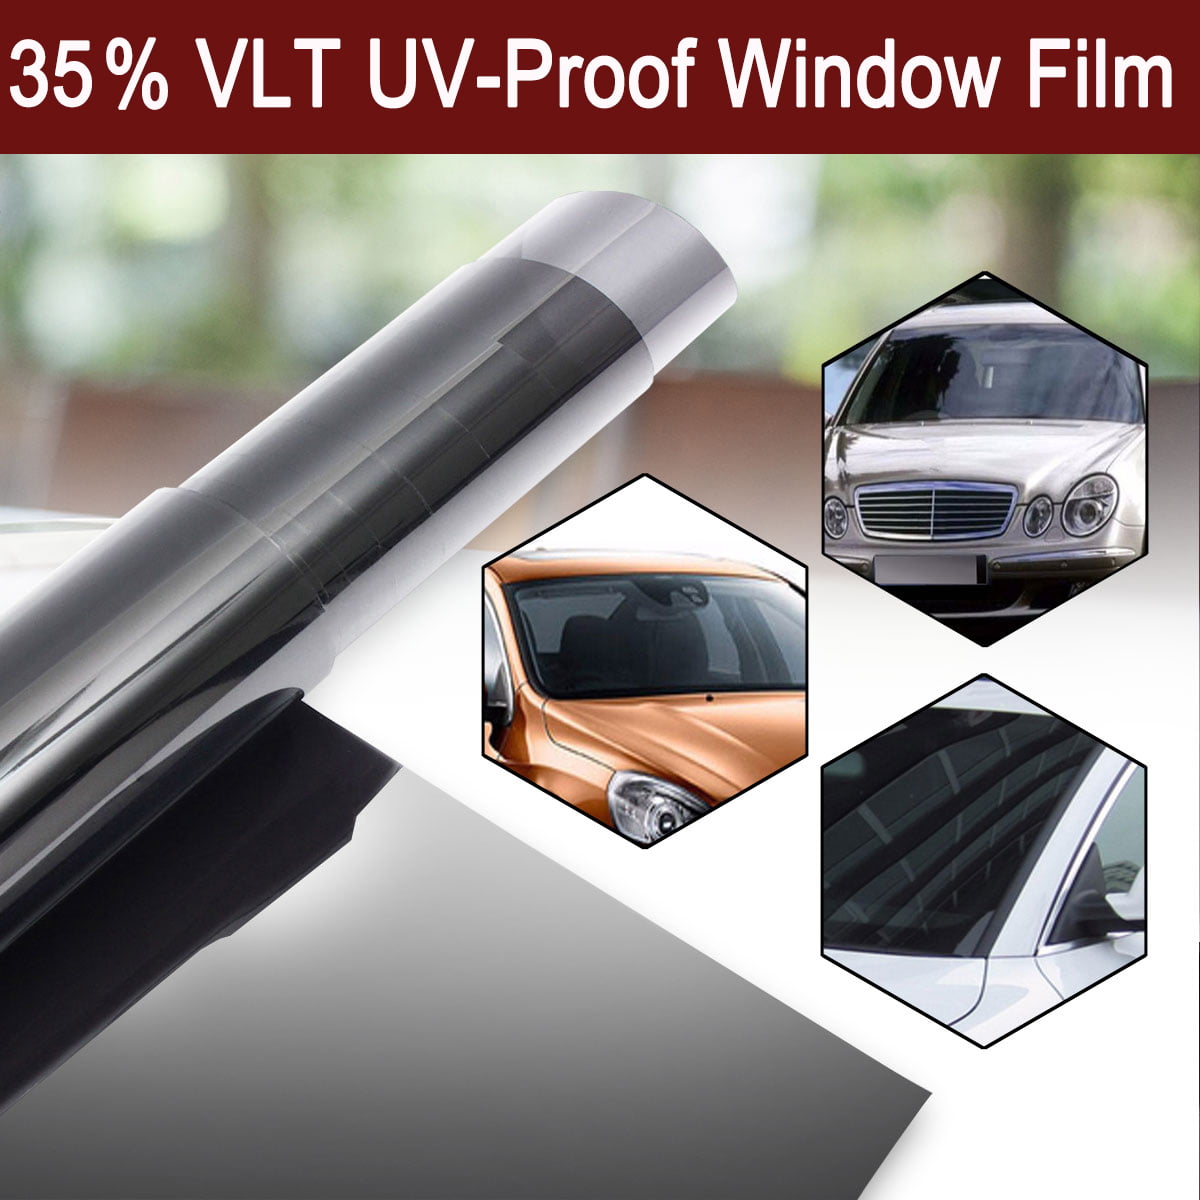 Norld 50% 36 in x 5 Ft DIY Professional Adhesive Window Tint Film Uncut Roll 